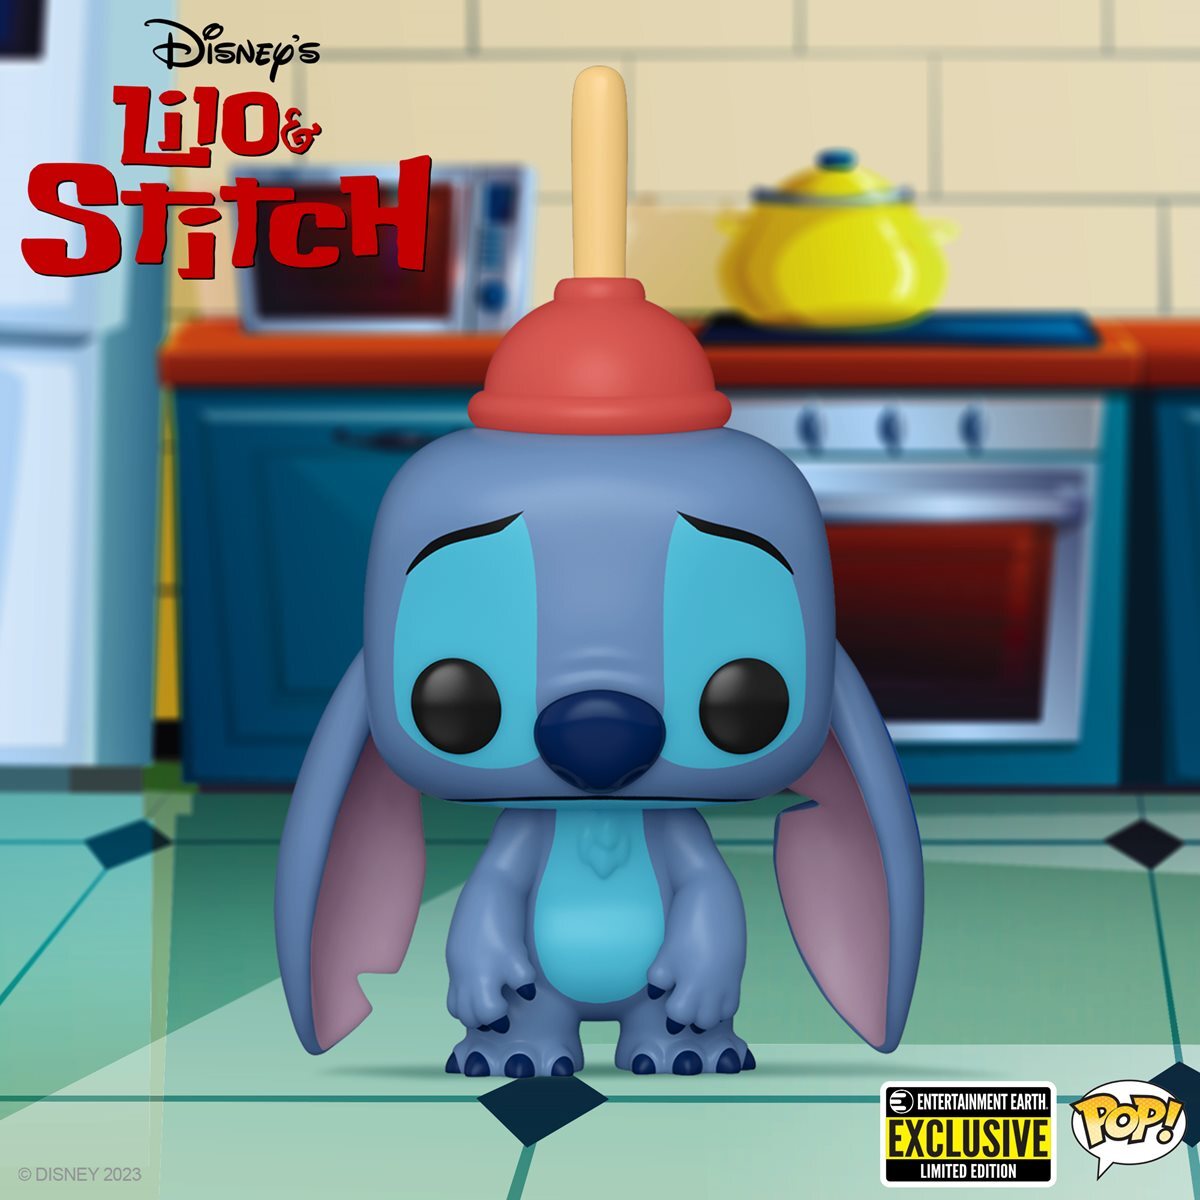 Stitch with Plunger - #1354 - Entertainment Earth Exclusive - Box Condition 10/10 - NEW